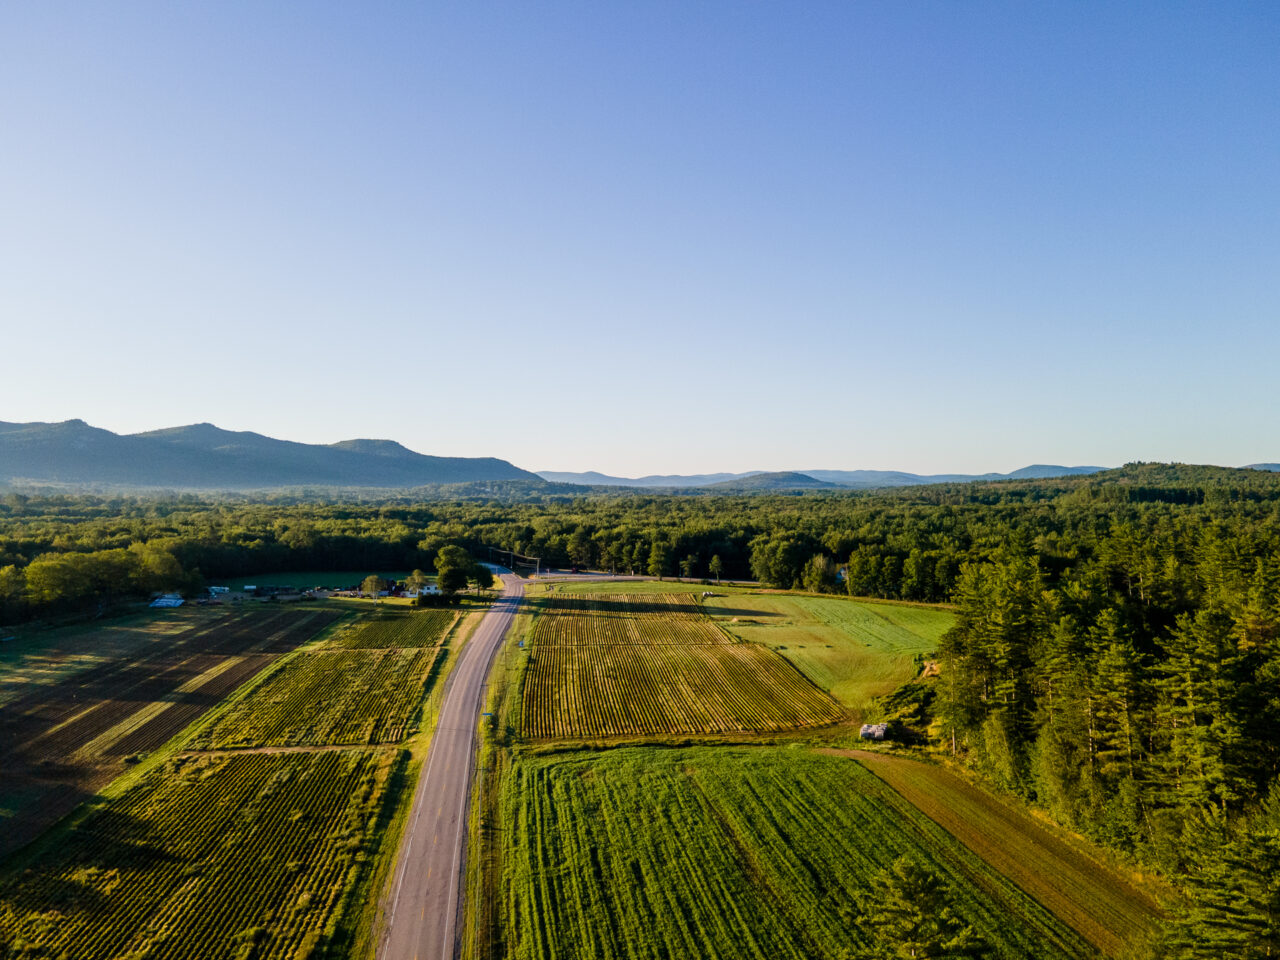 Green farmland in the state of New Hampshire.